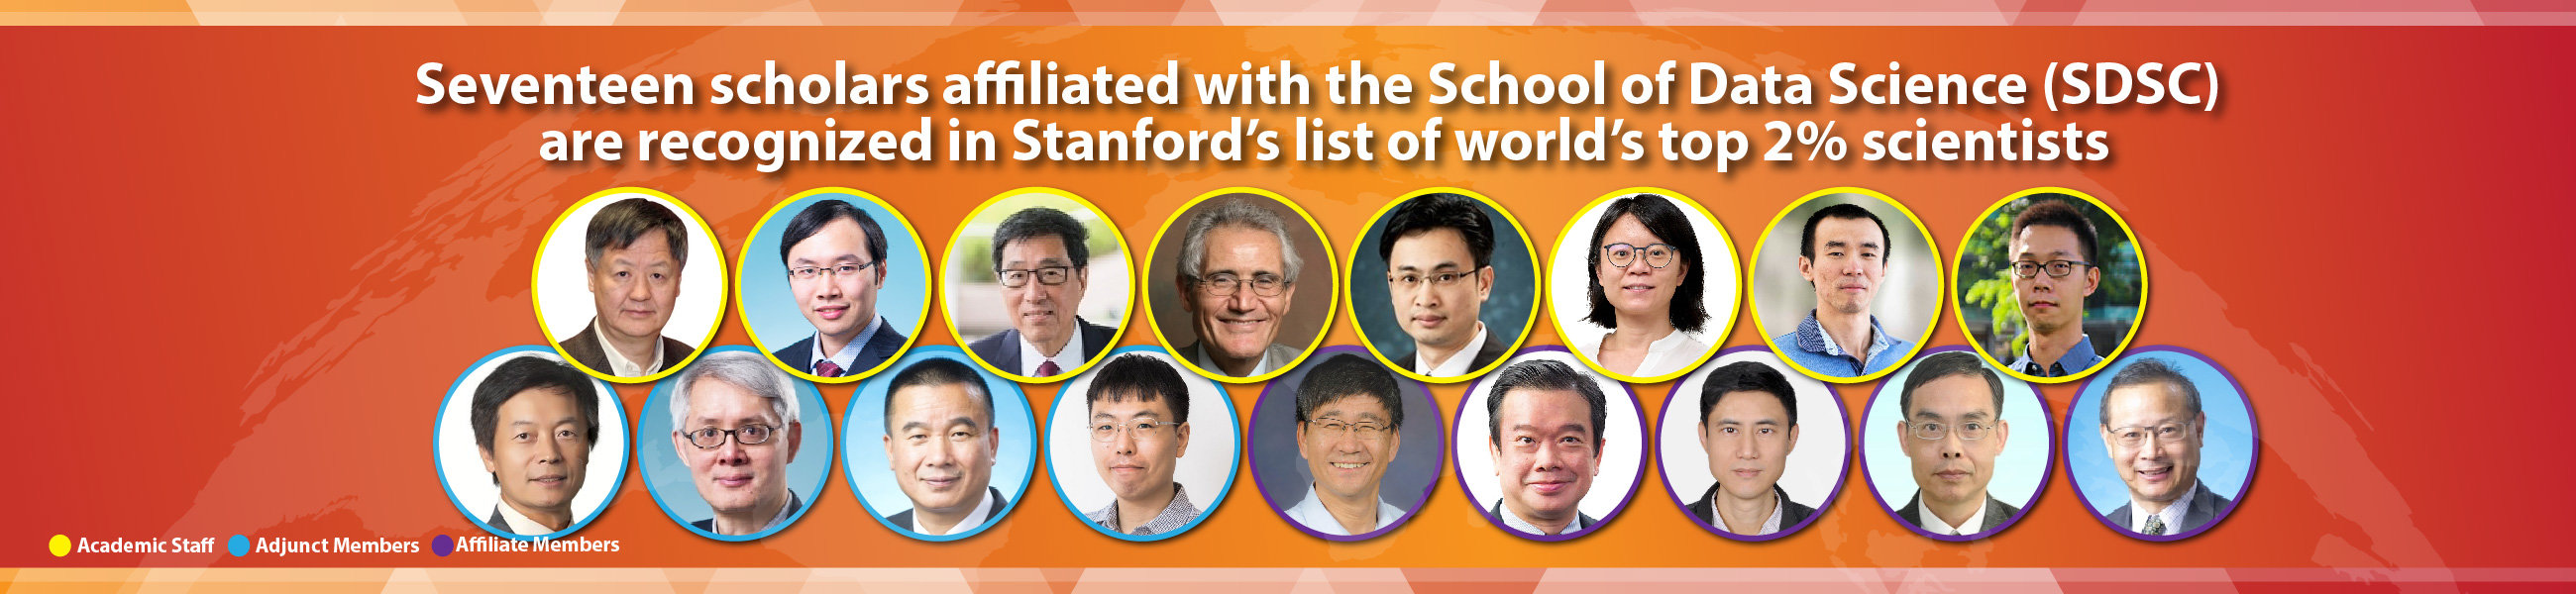 Seventeen Scholars affiliated with the School of Data Science (SDSC) are recognized in Stanford’s List of World’s Top 2% Scientists